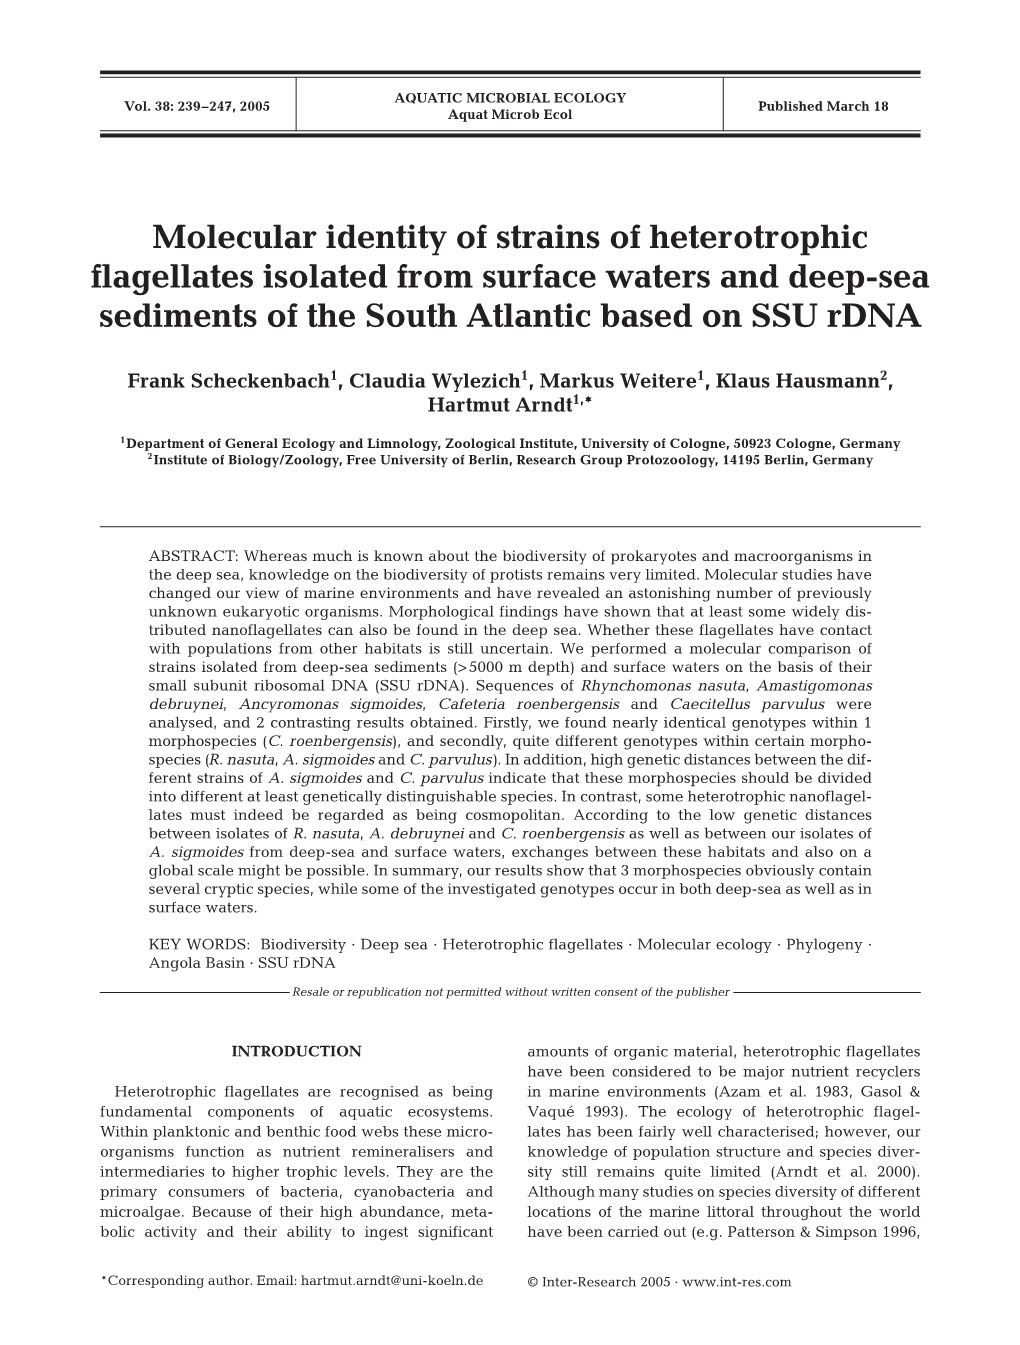 Molecular Identity of Strains of Heterotrophic Flagellates Isolated from Surface Waters and Deep-Sea Sediments of the South Atlantic Based on SSU Rdna